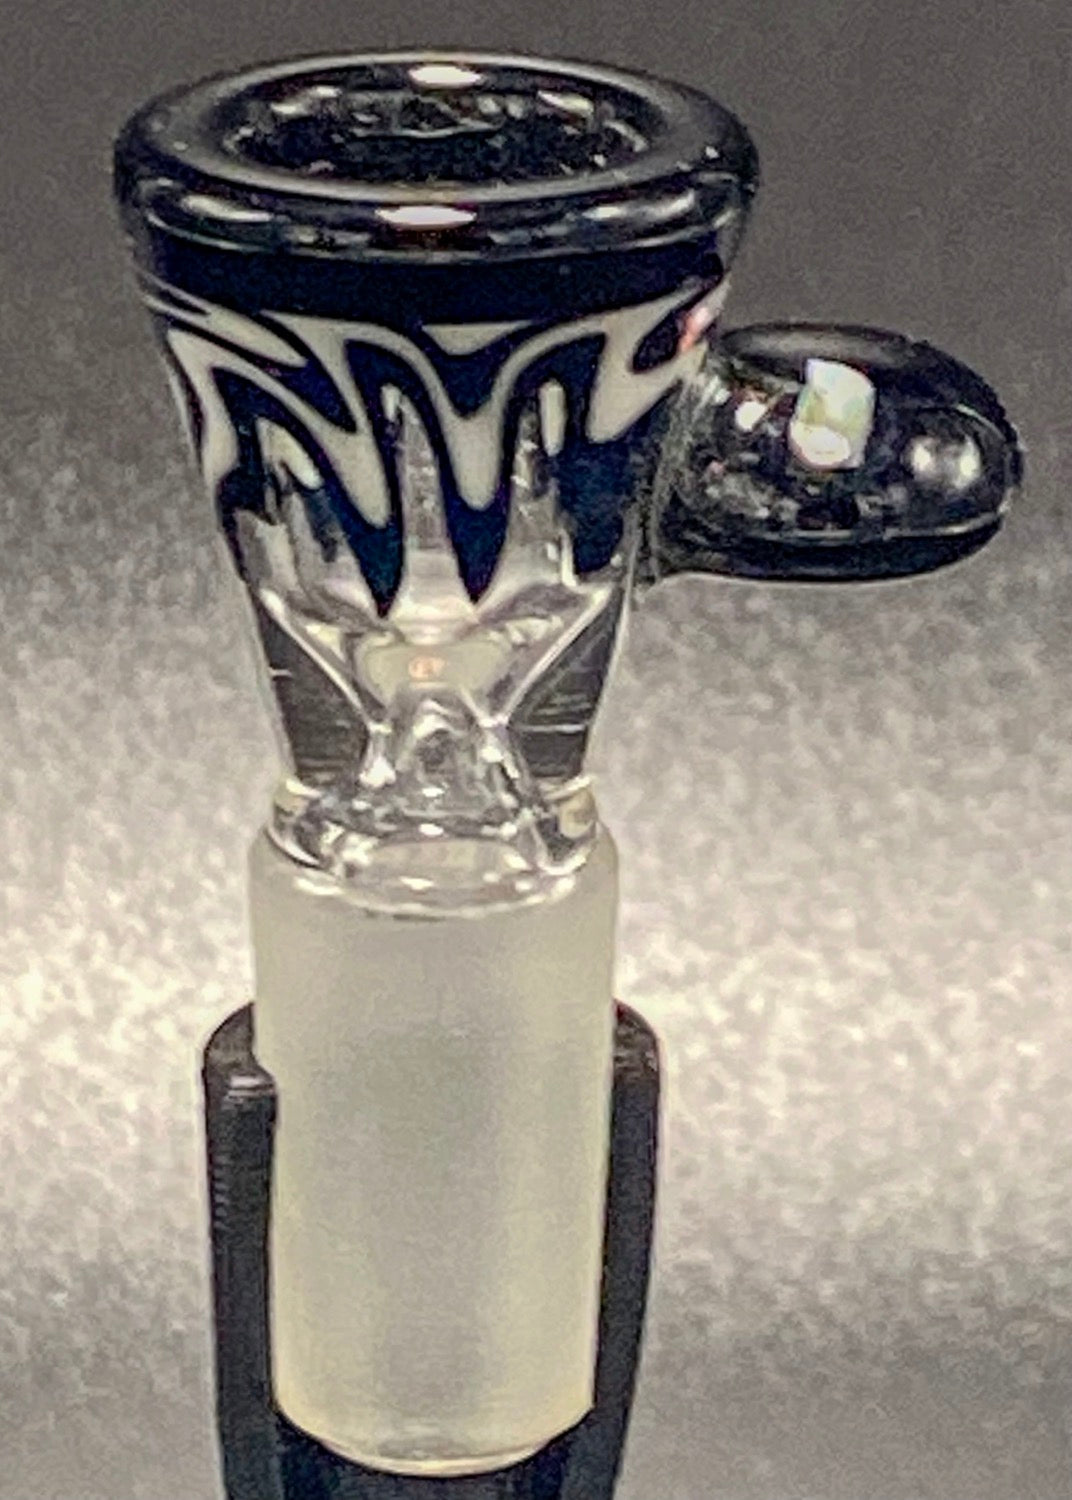 J-Honey Glassworks Black & White Worked 14mm Slide With Opal In Handle - TheSmokeyMcPotz Collection 